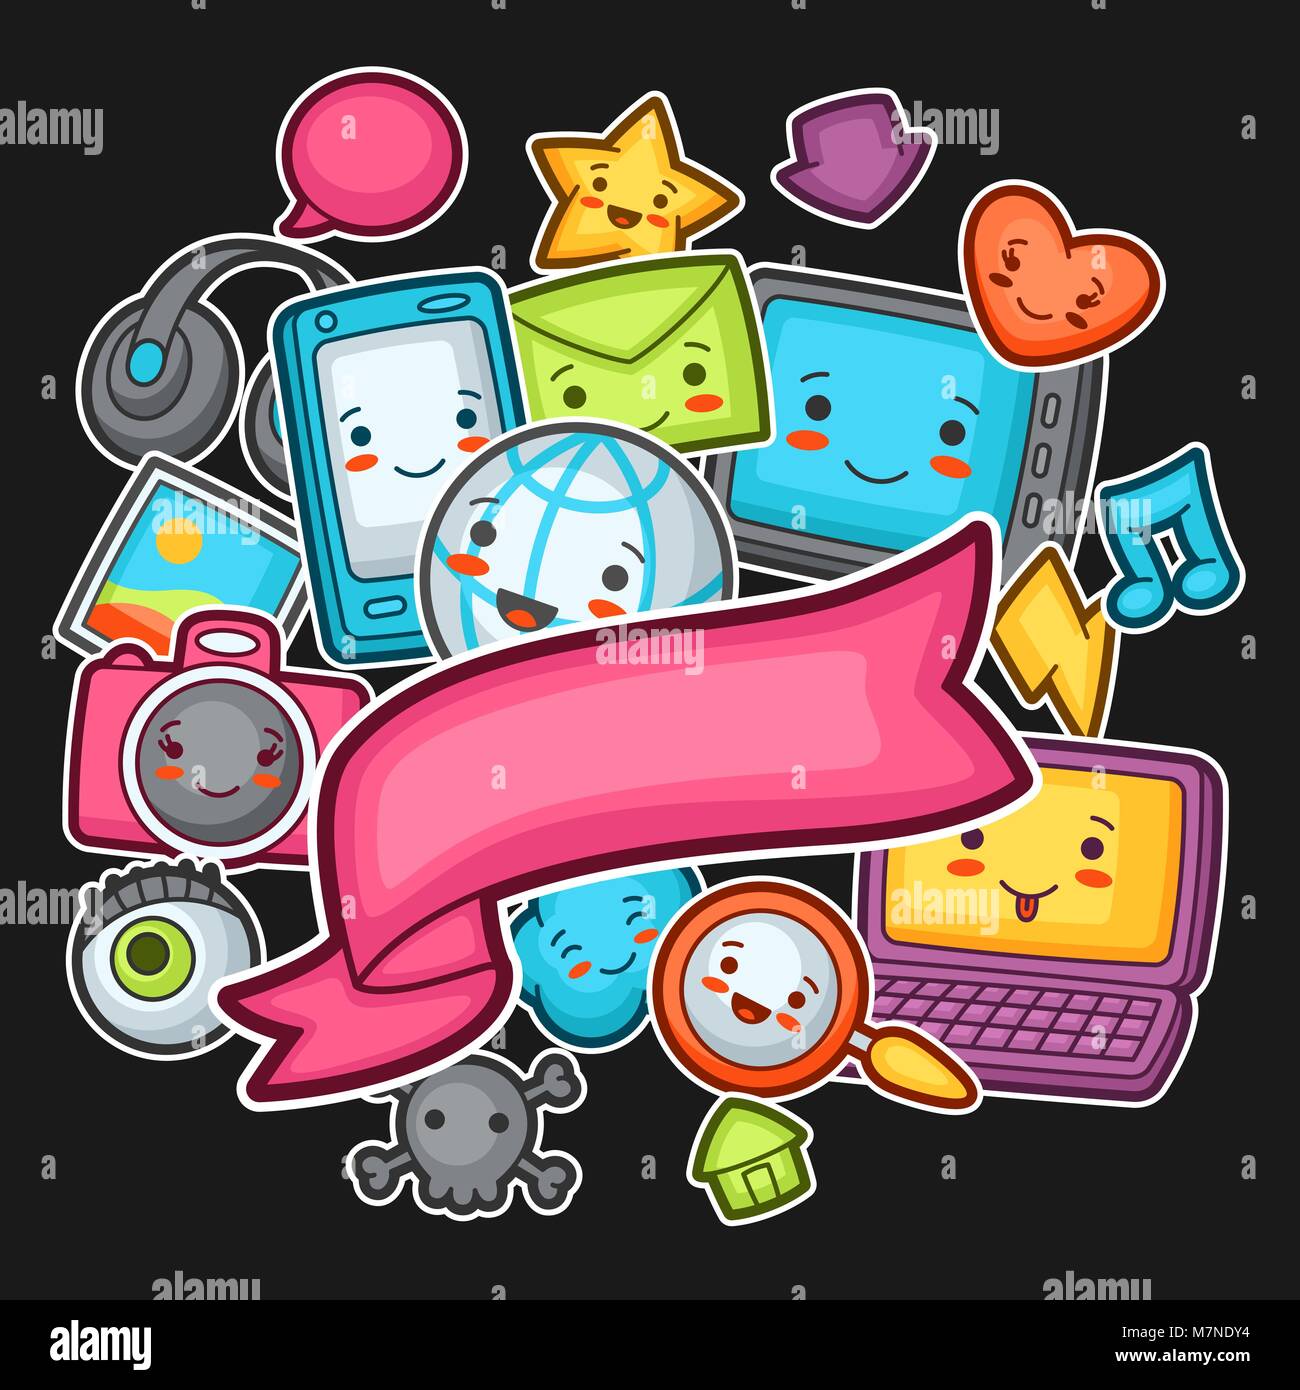 Kawaii gadgets social network background. Doodles with pretty